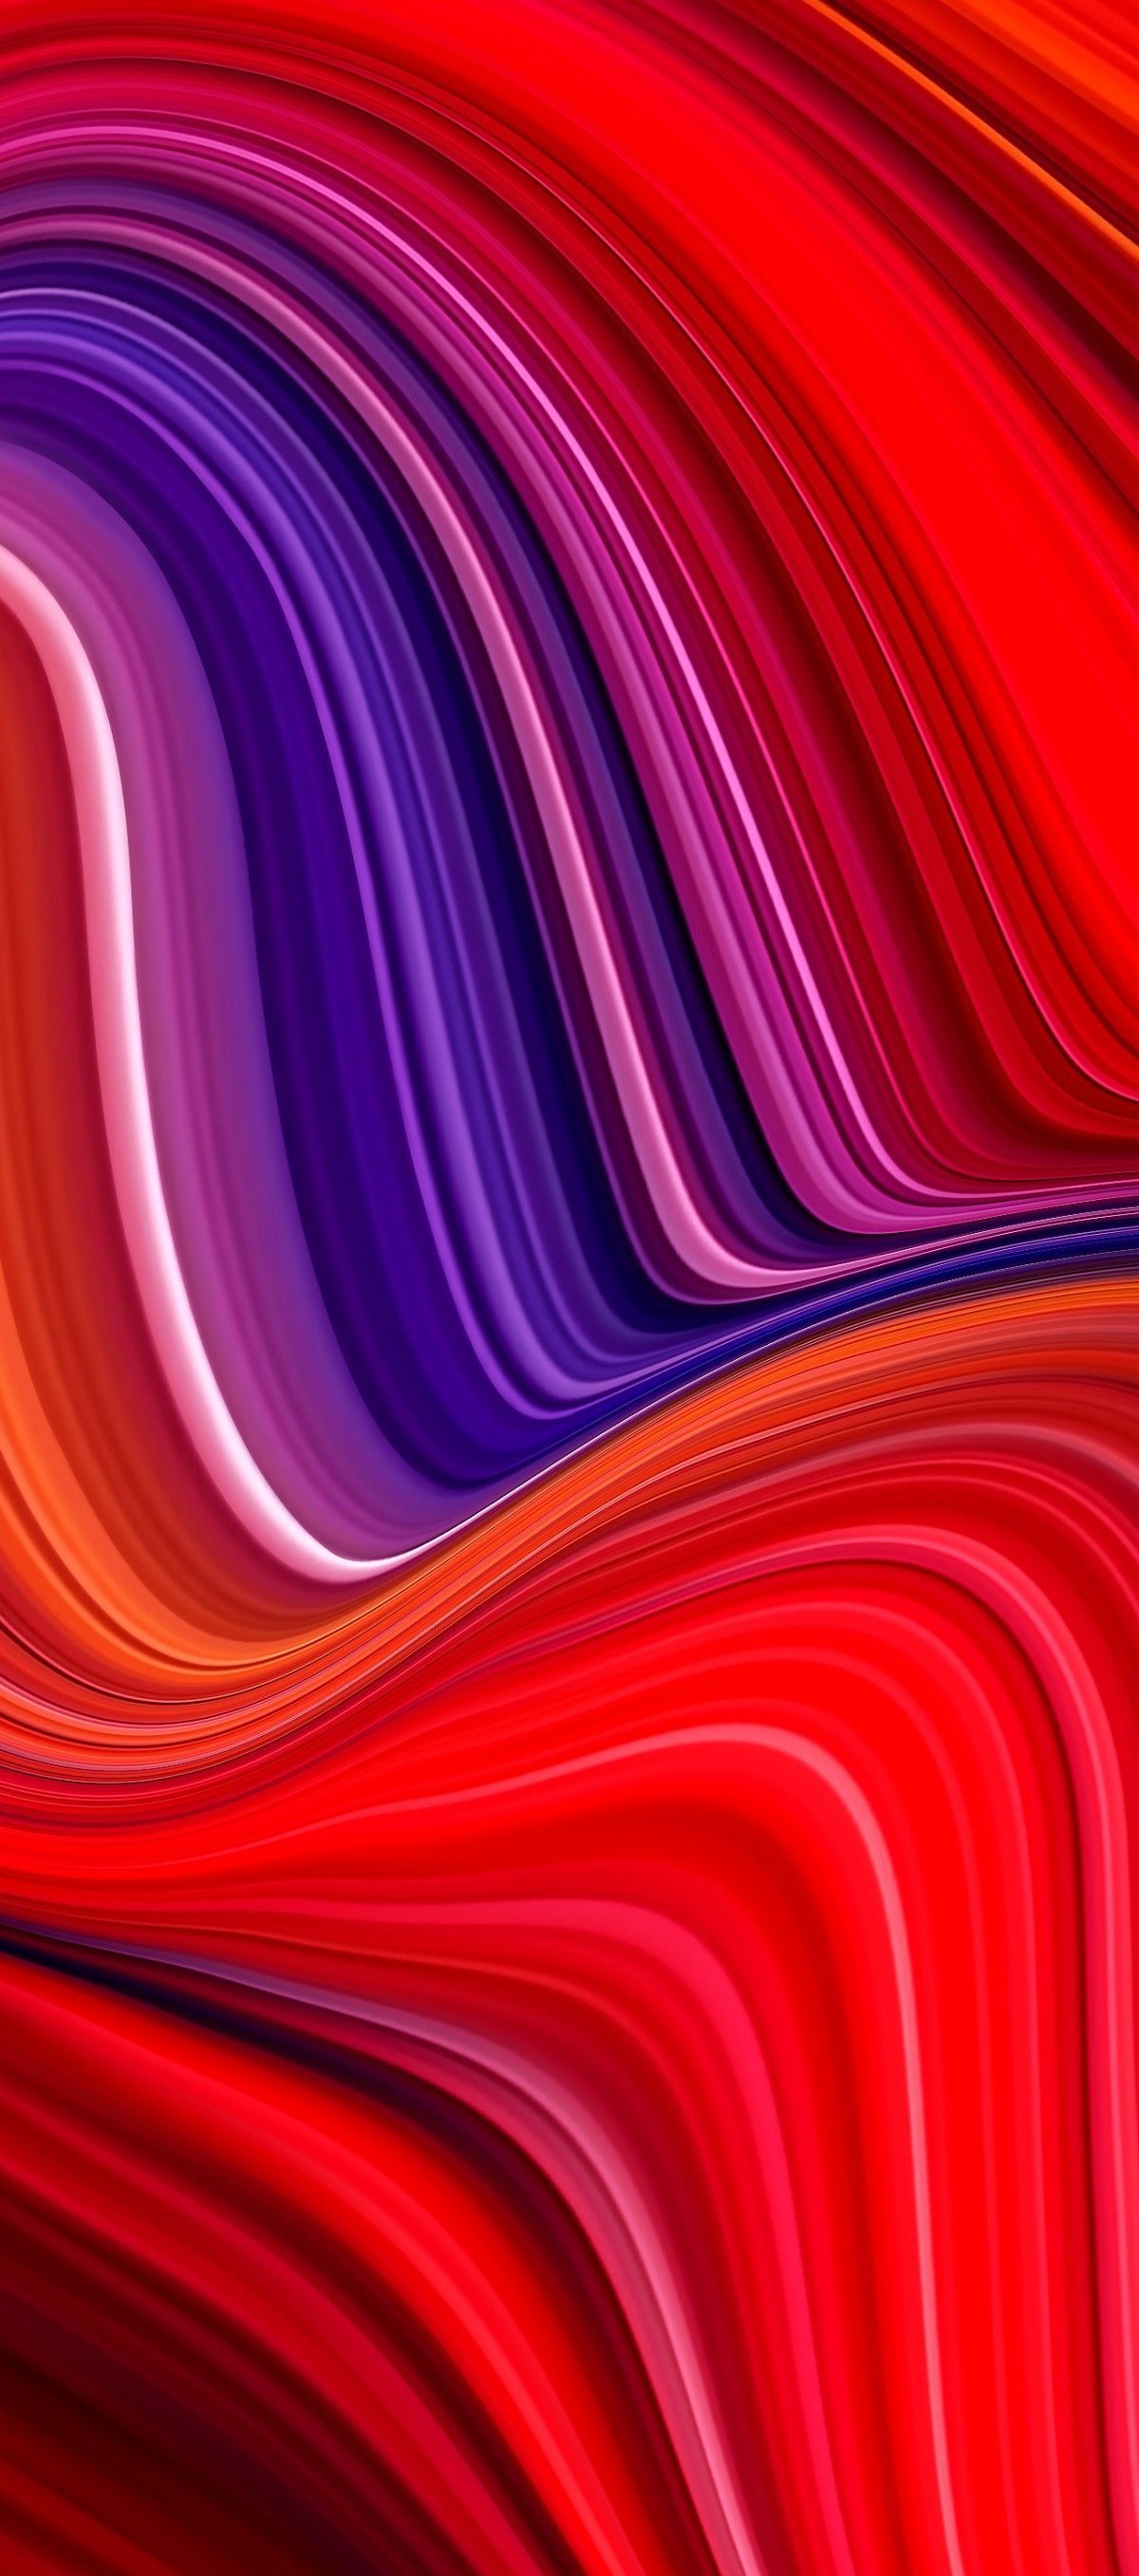 iOS iPhone X, red, purple, clean, simple, abstract, apple, wallpaper, iphone clean, beauty, colour, iOS,. iPhone wallpaper, Cellphone wallpaper, Wallpaper